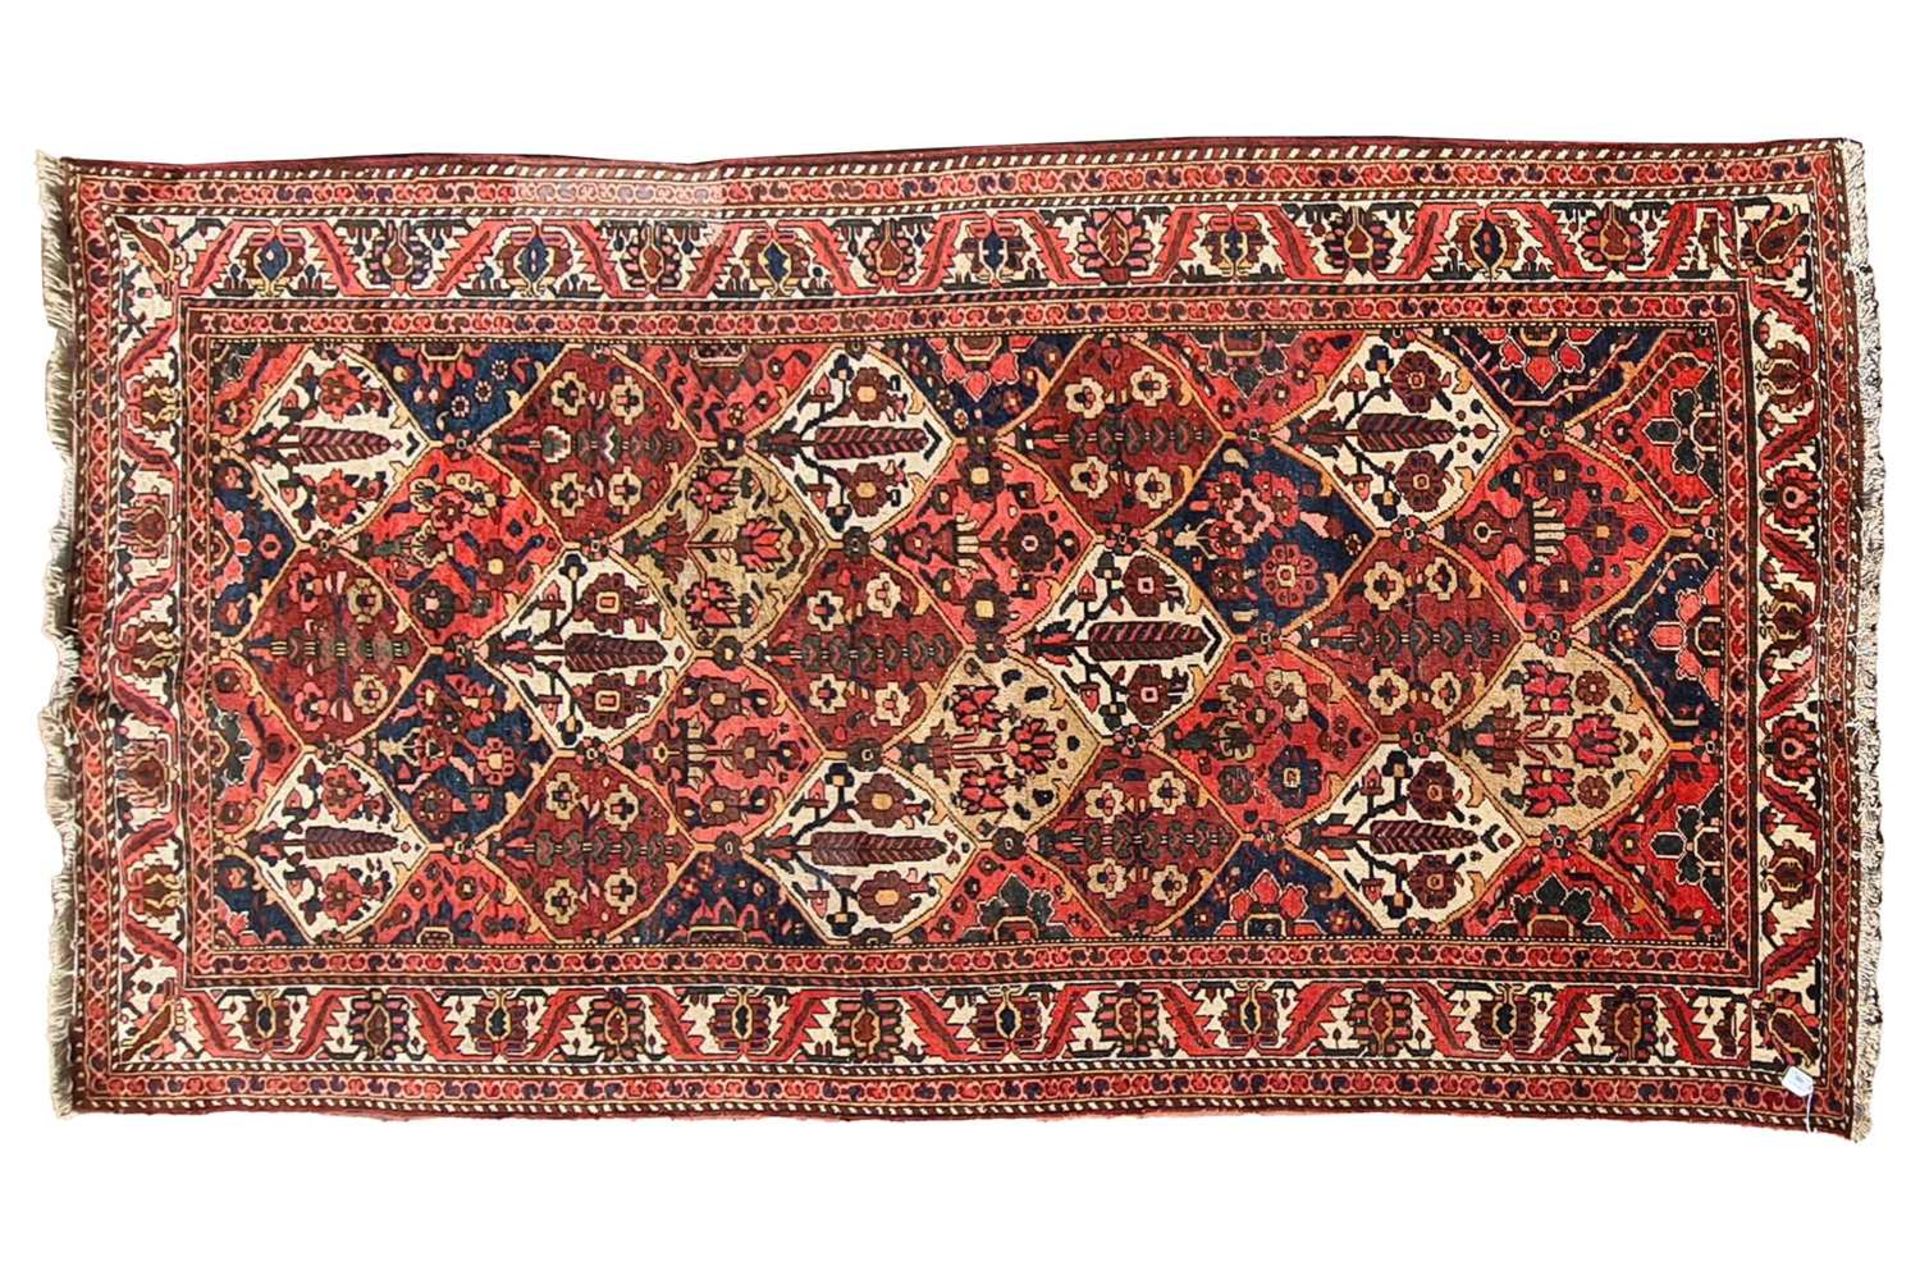 A red ground Baktiari carpet, with an allover compartmented design within multiple borders, 302 cm x